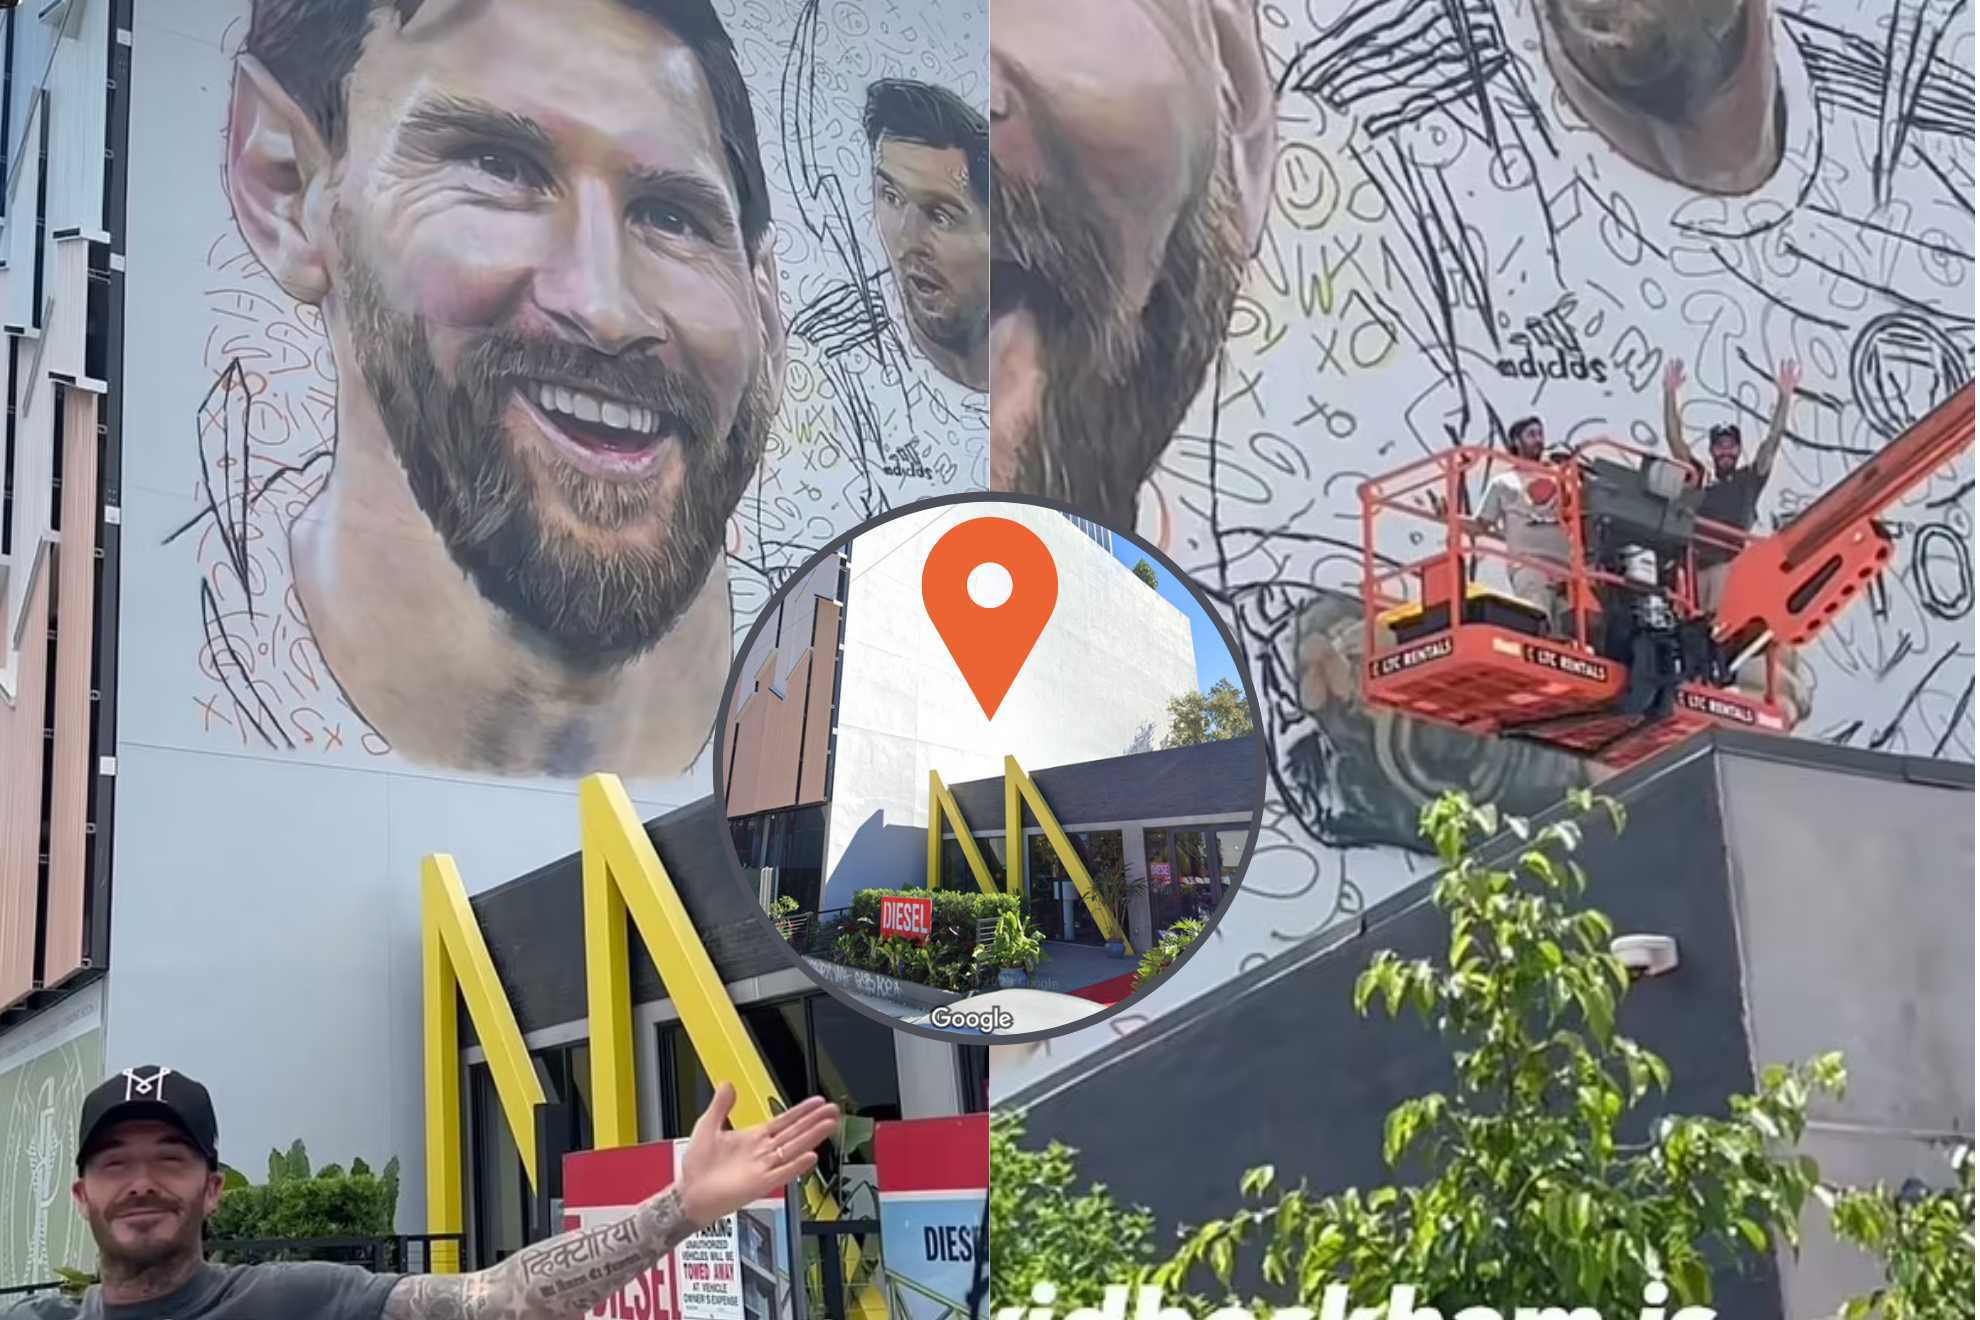 David Beckham proudly poses in front of his Messi art mural. Here's how to find it in Miami.